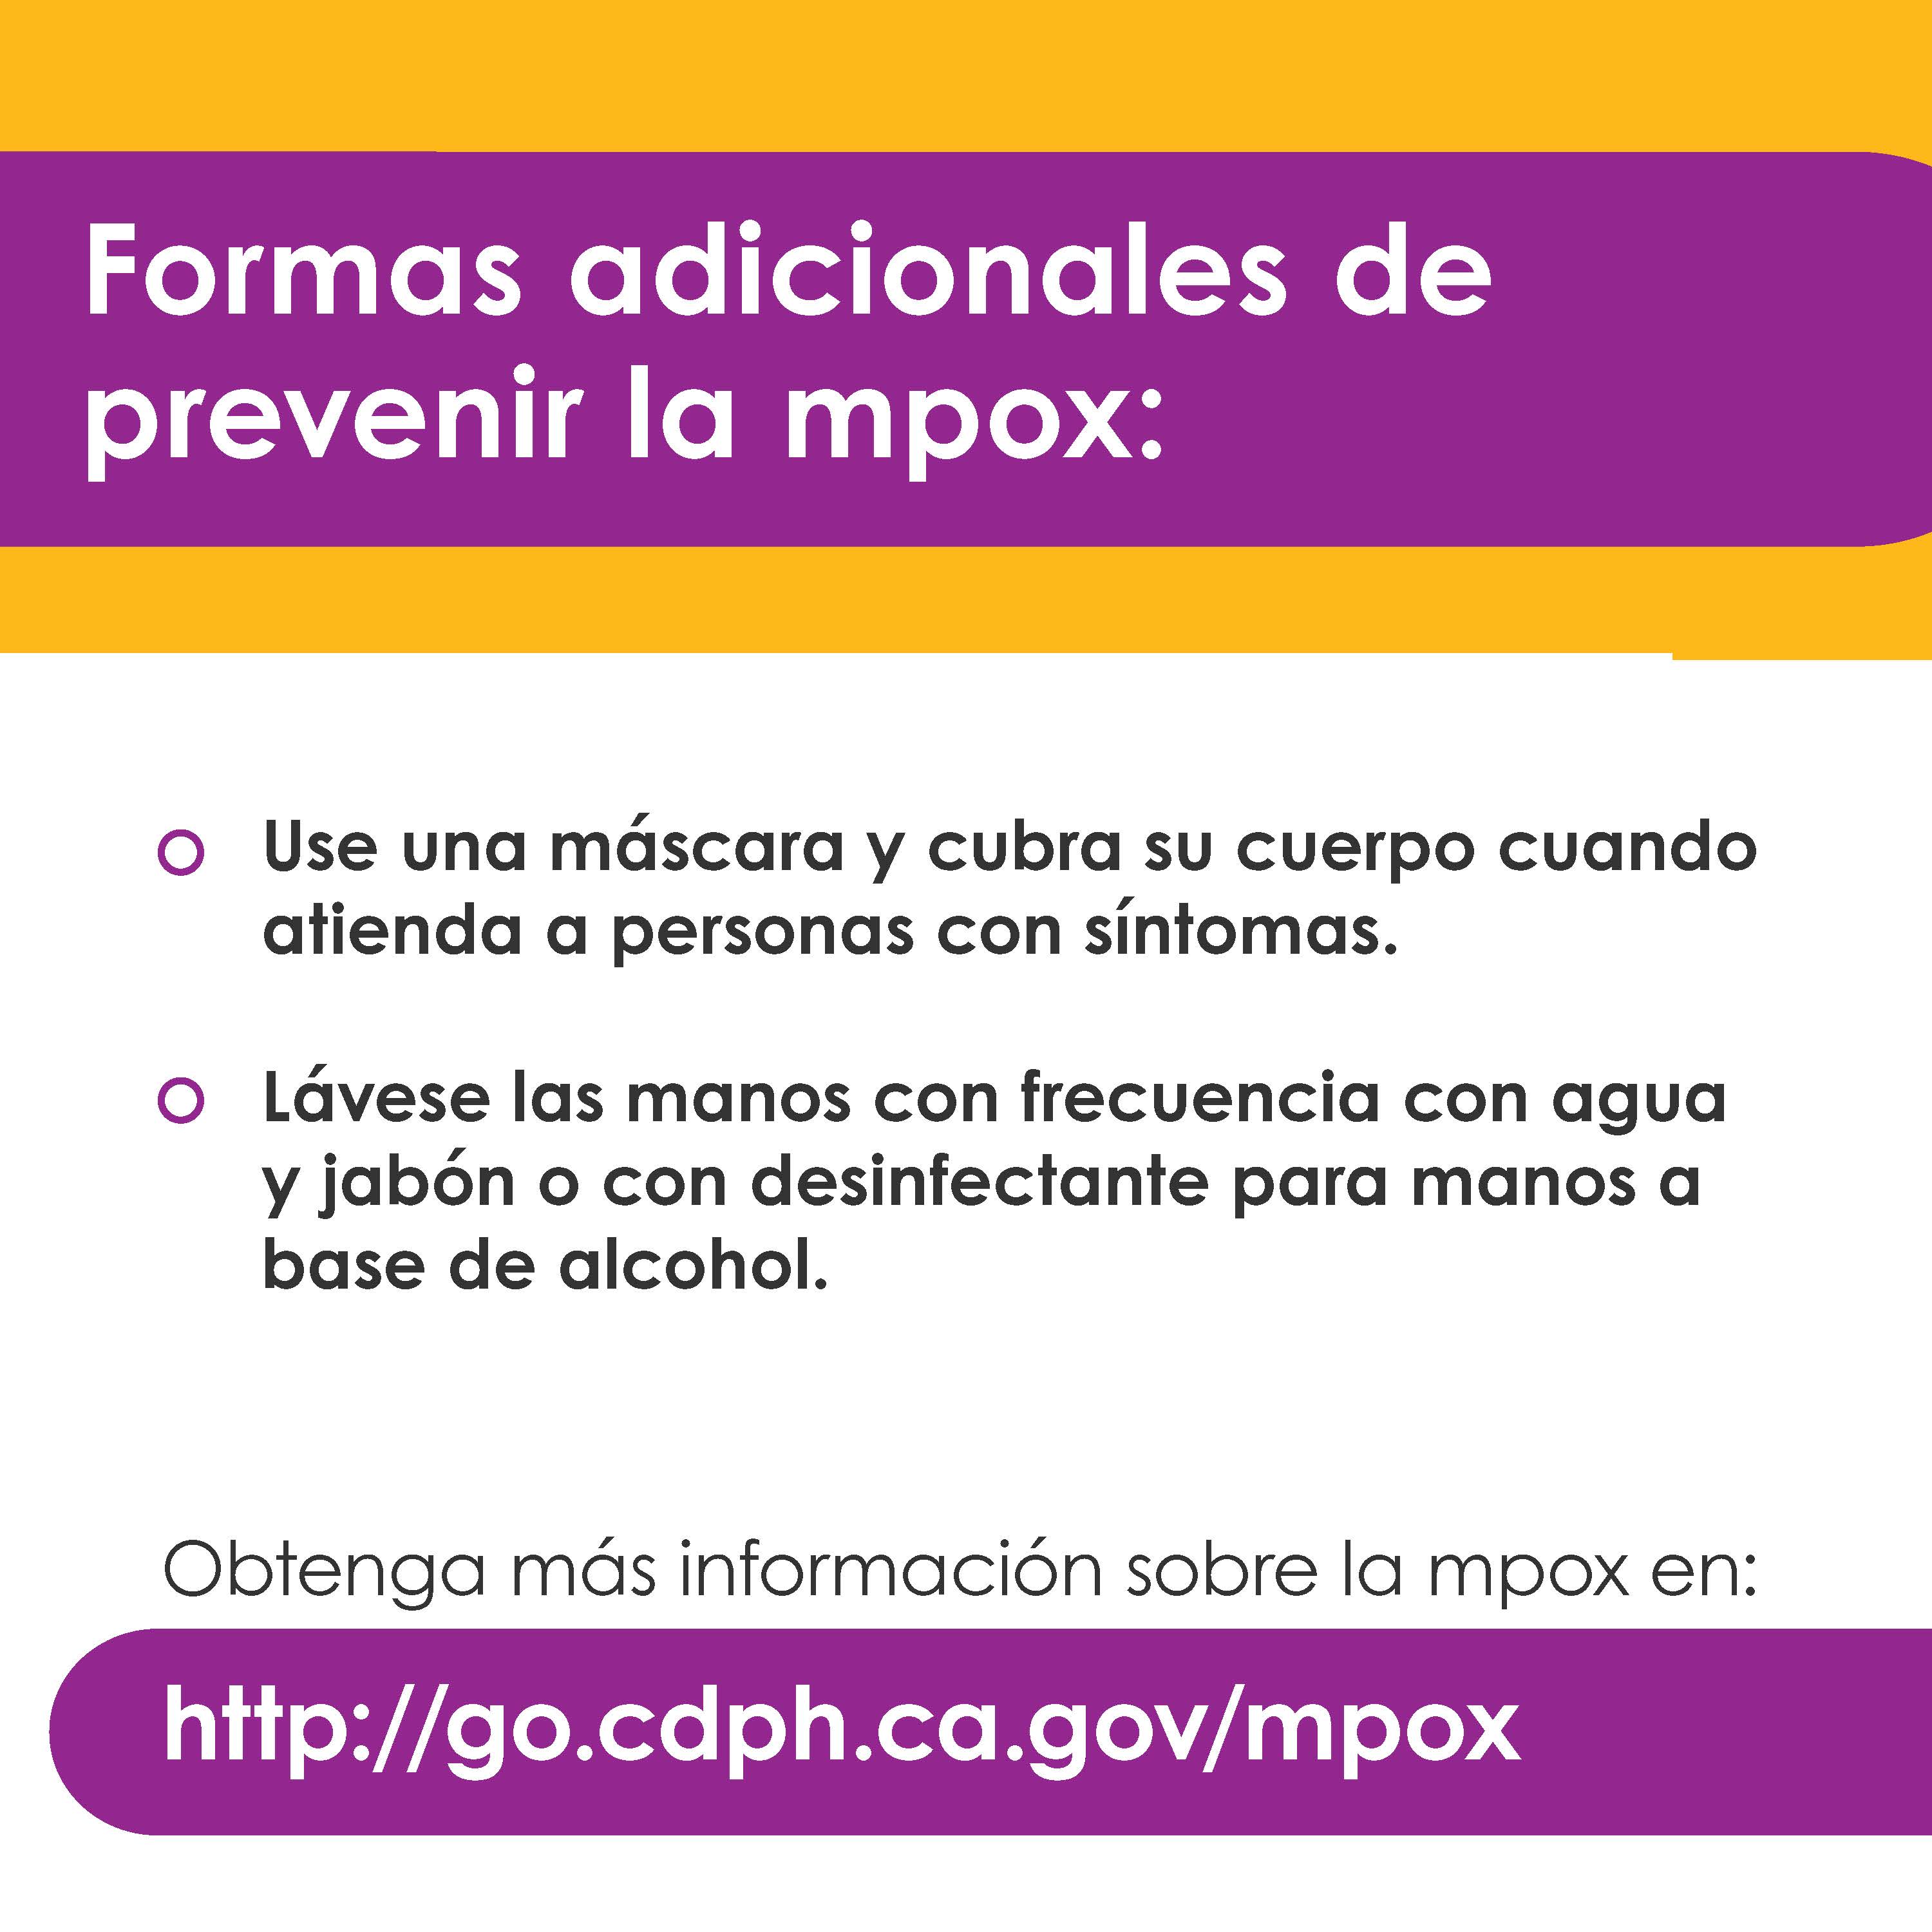 Additional ways to prevent MPX